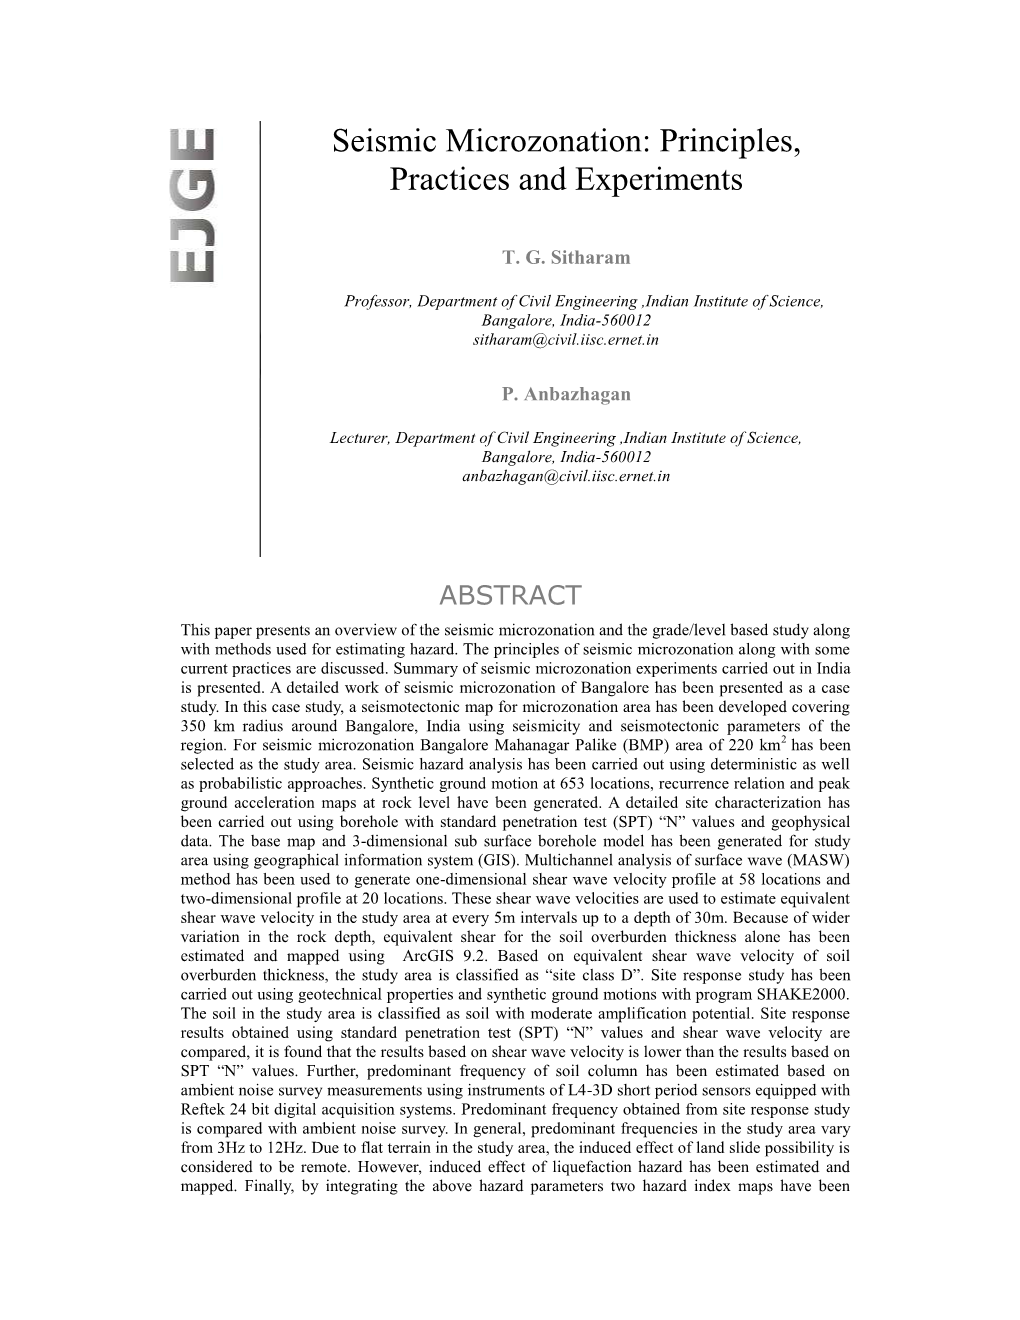 Seismic Microzonation: Principles, Practices and Experiments